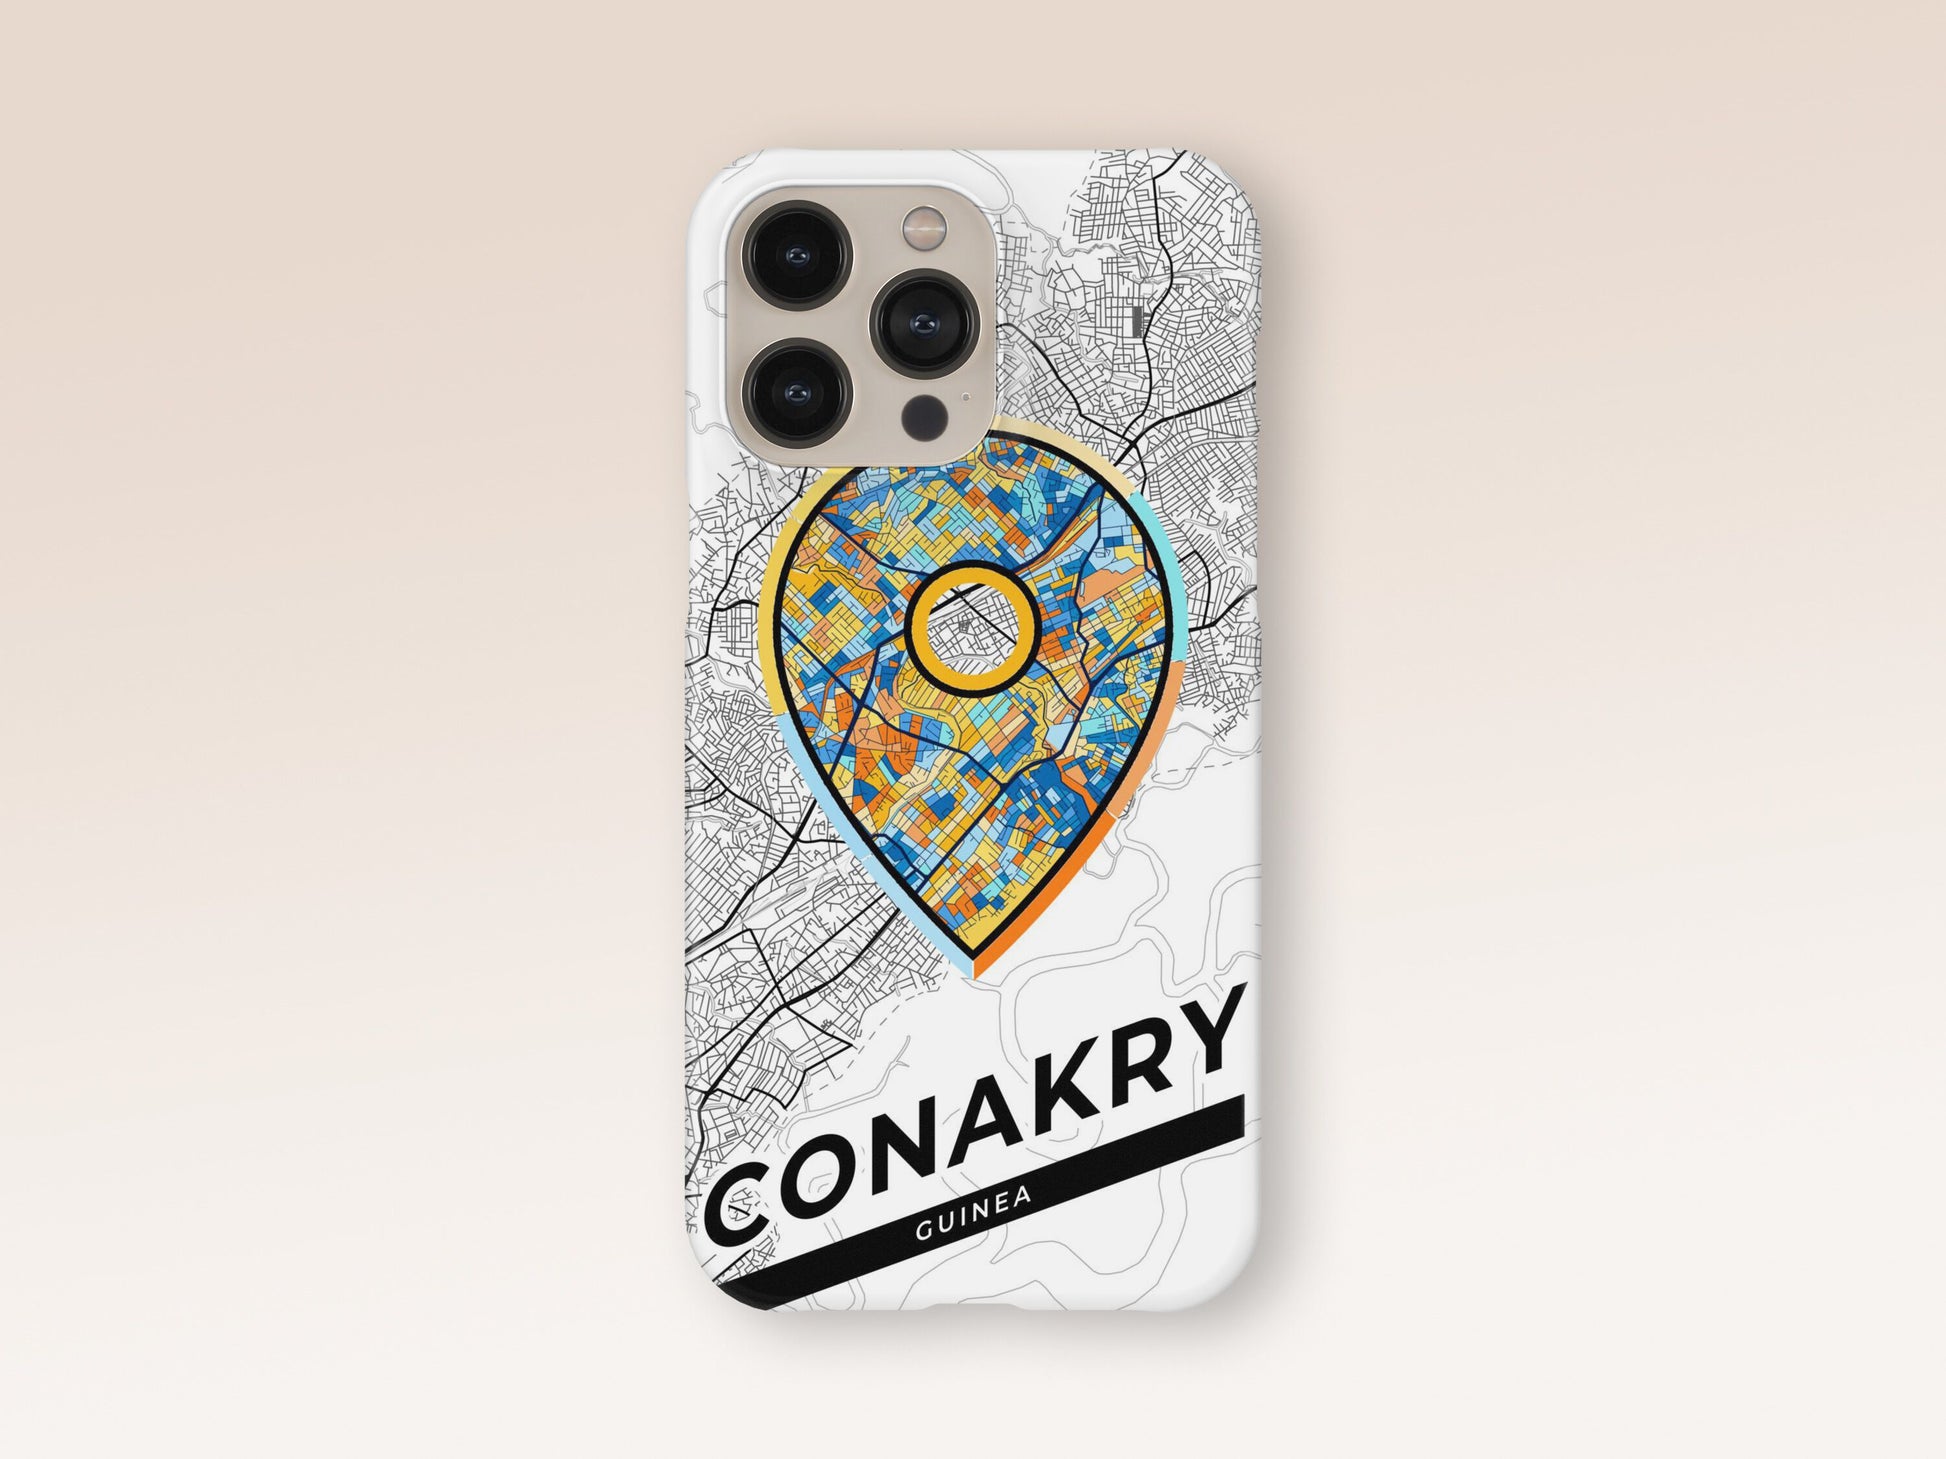 Conakry Guinea slim phone case with colorful icon. Birthday, wedding or housewarming gift. Couple match cases. 1